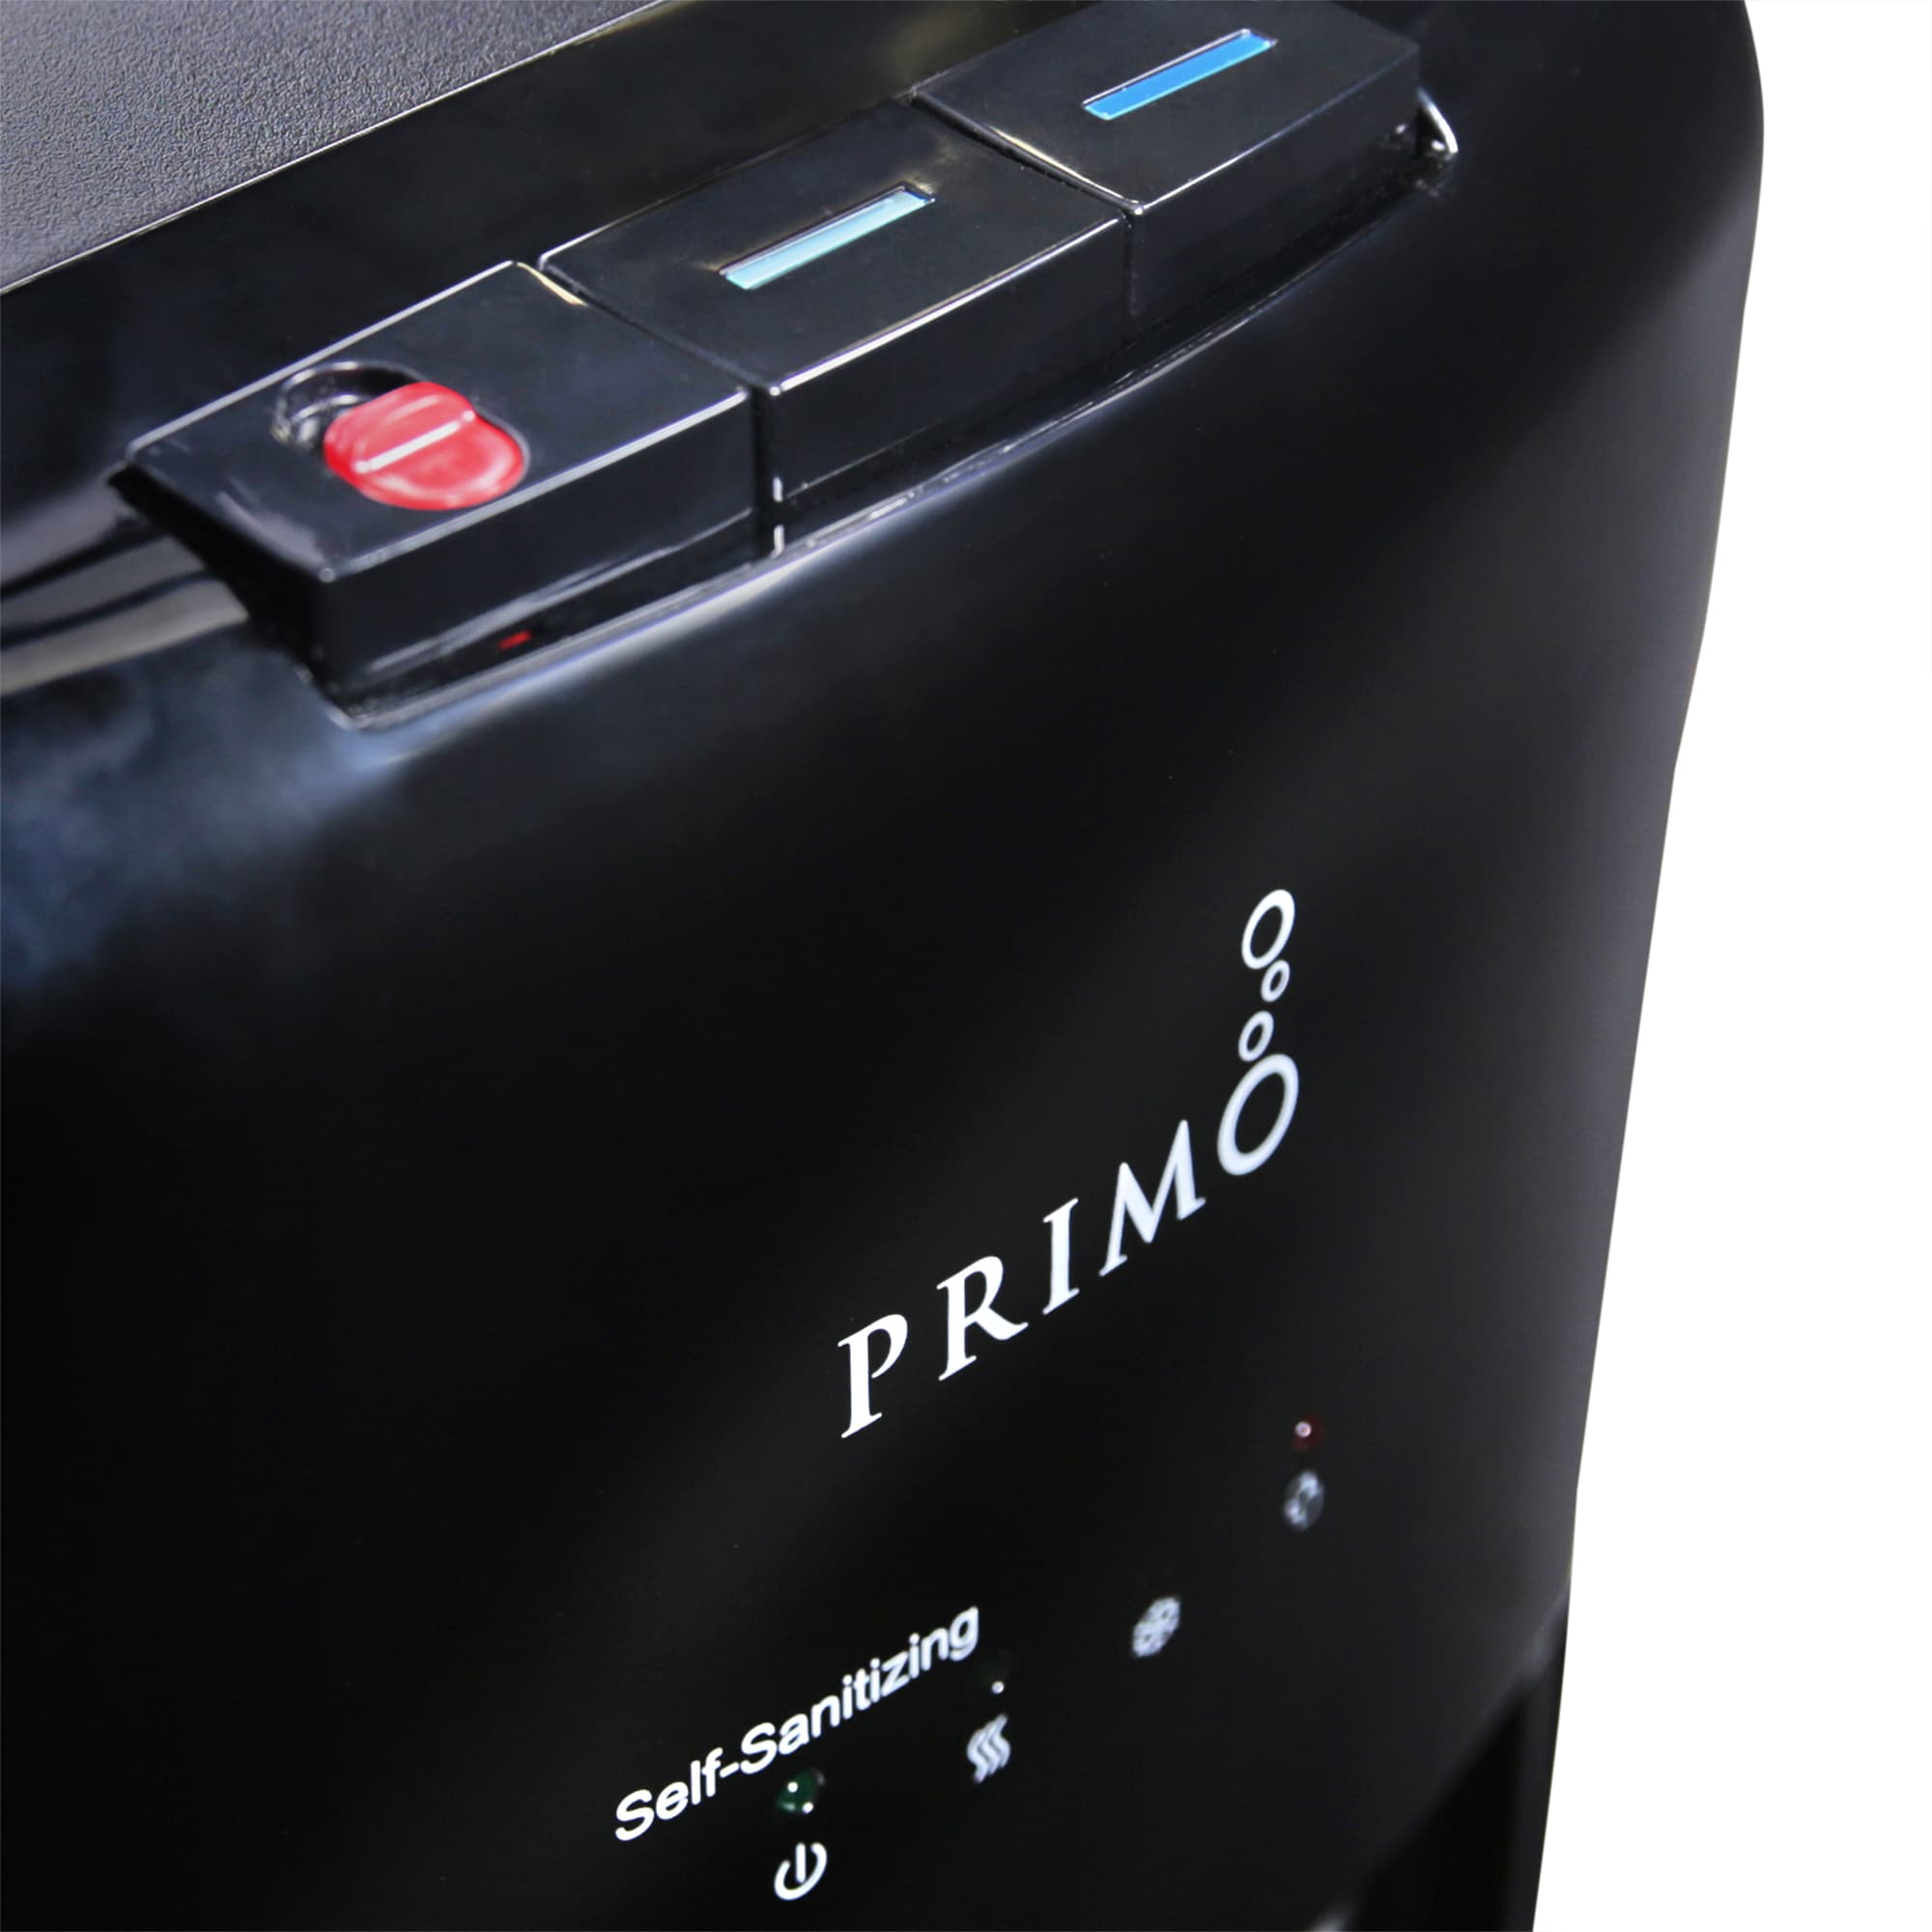 Switching to Primo Water - Should You Do It? - Eat Move Make